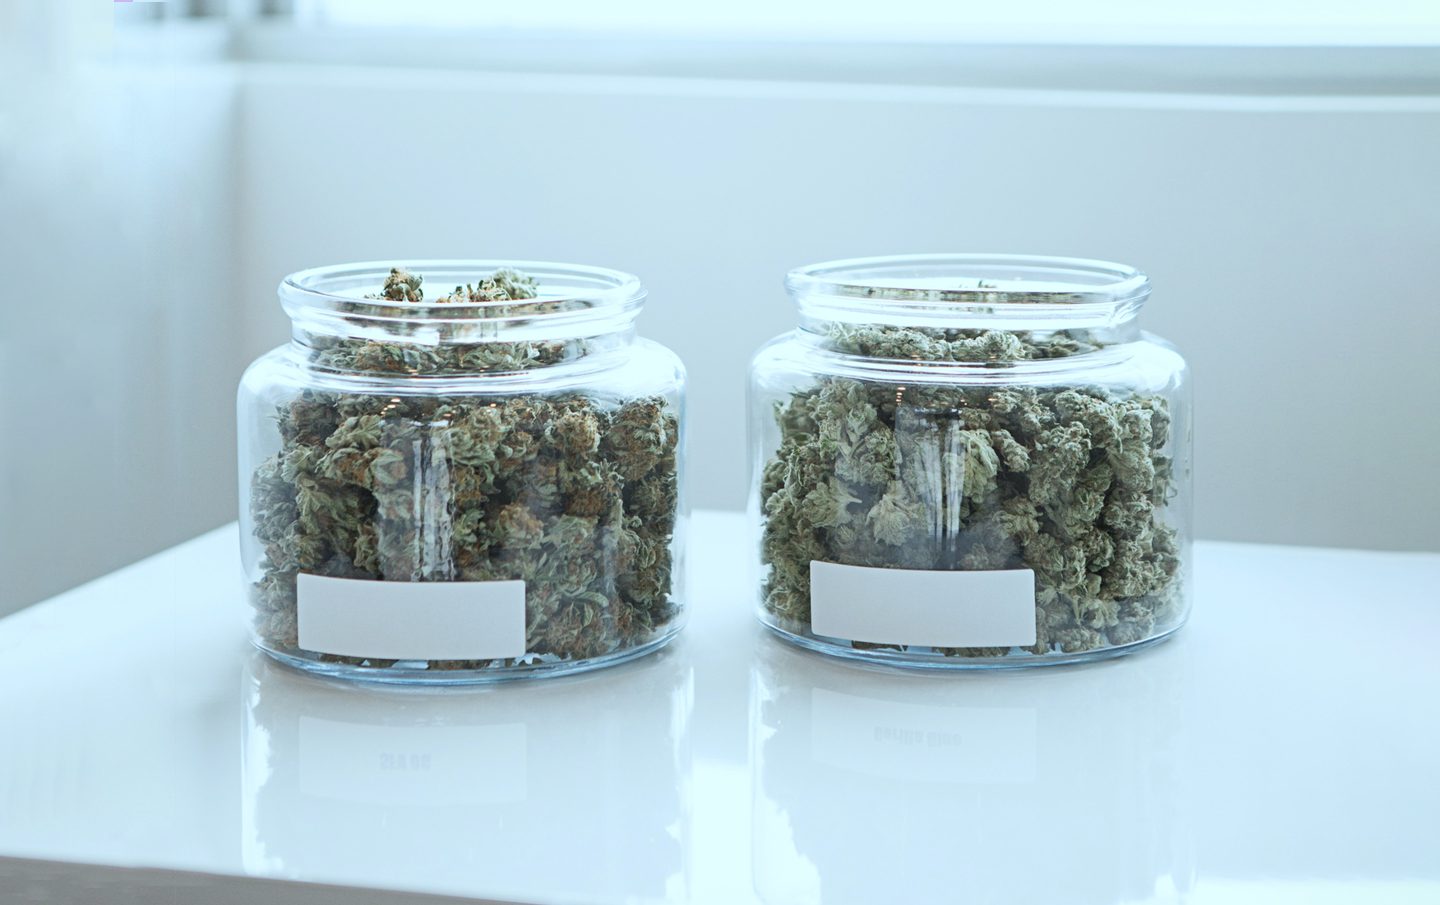 What to expect during your first dispensary visit